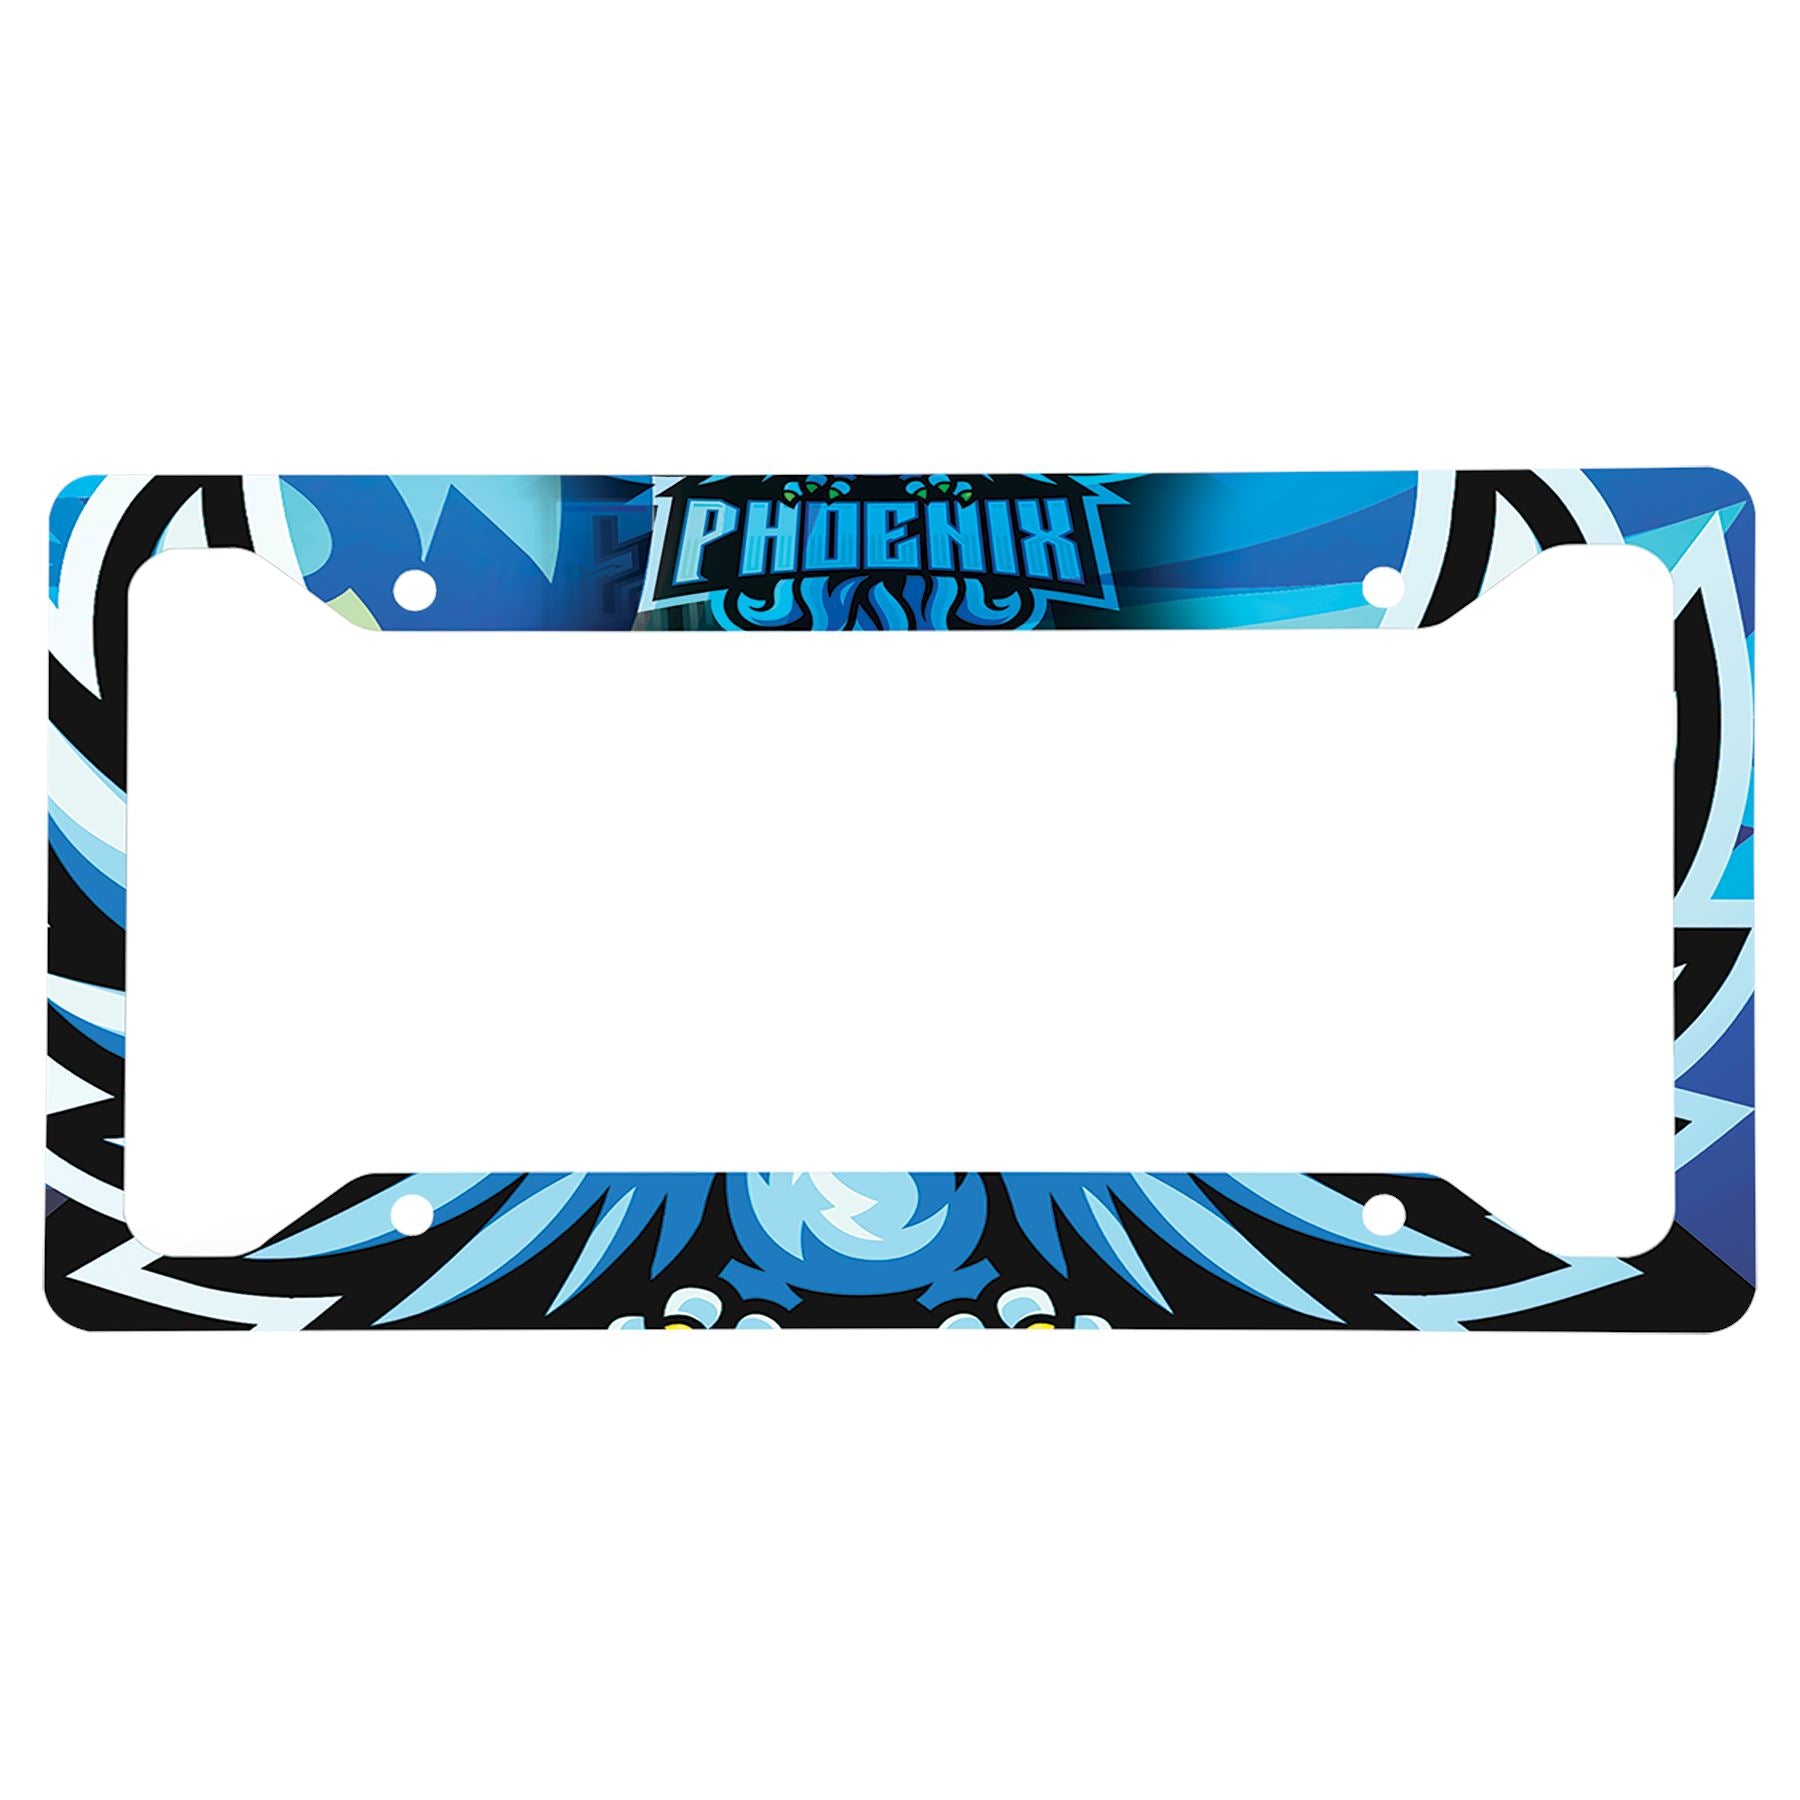 Gloss White Sublimatable Aluminum License Plate Frame, Unisub, 12.25" x 6.5", Full Color Dye Sub License Plate Frame Craftworks NW 